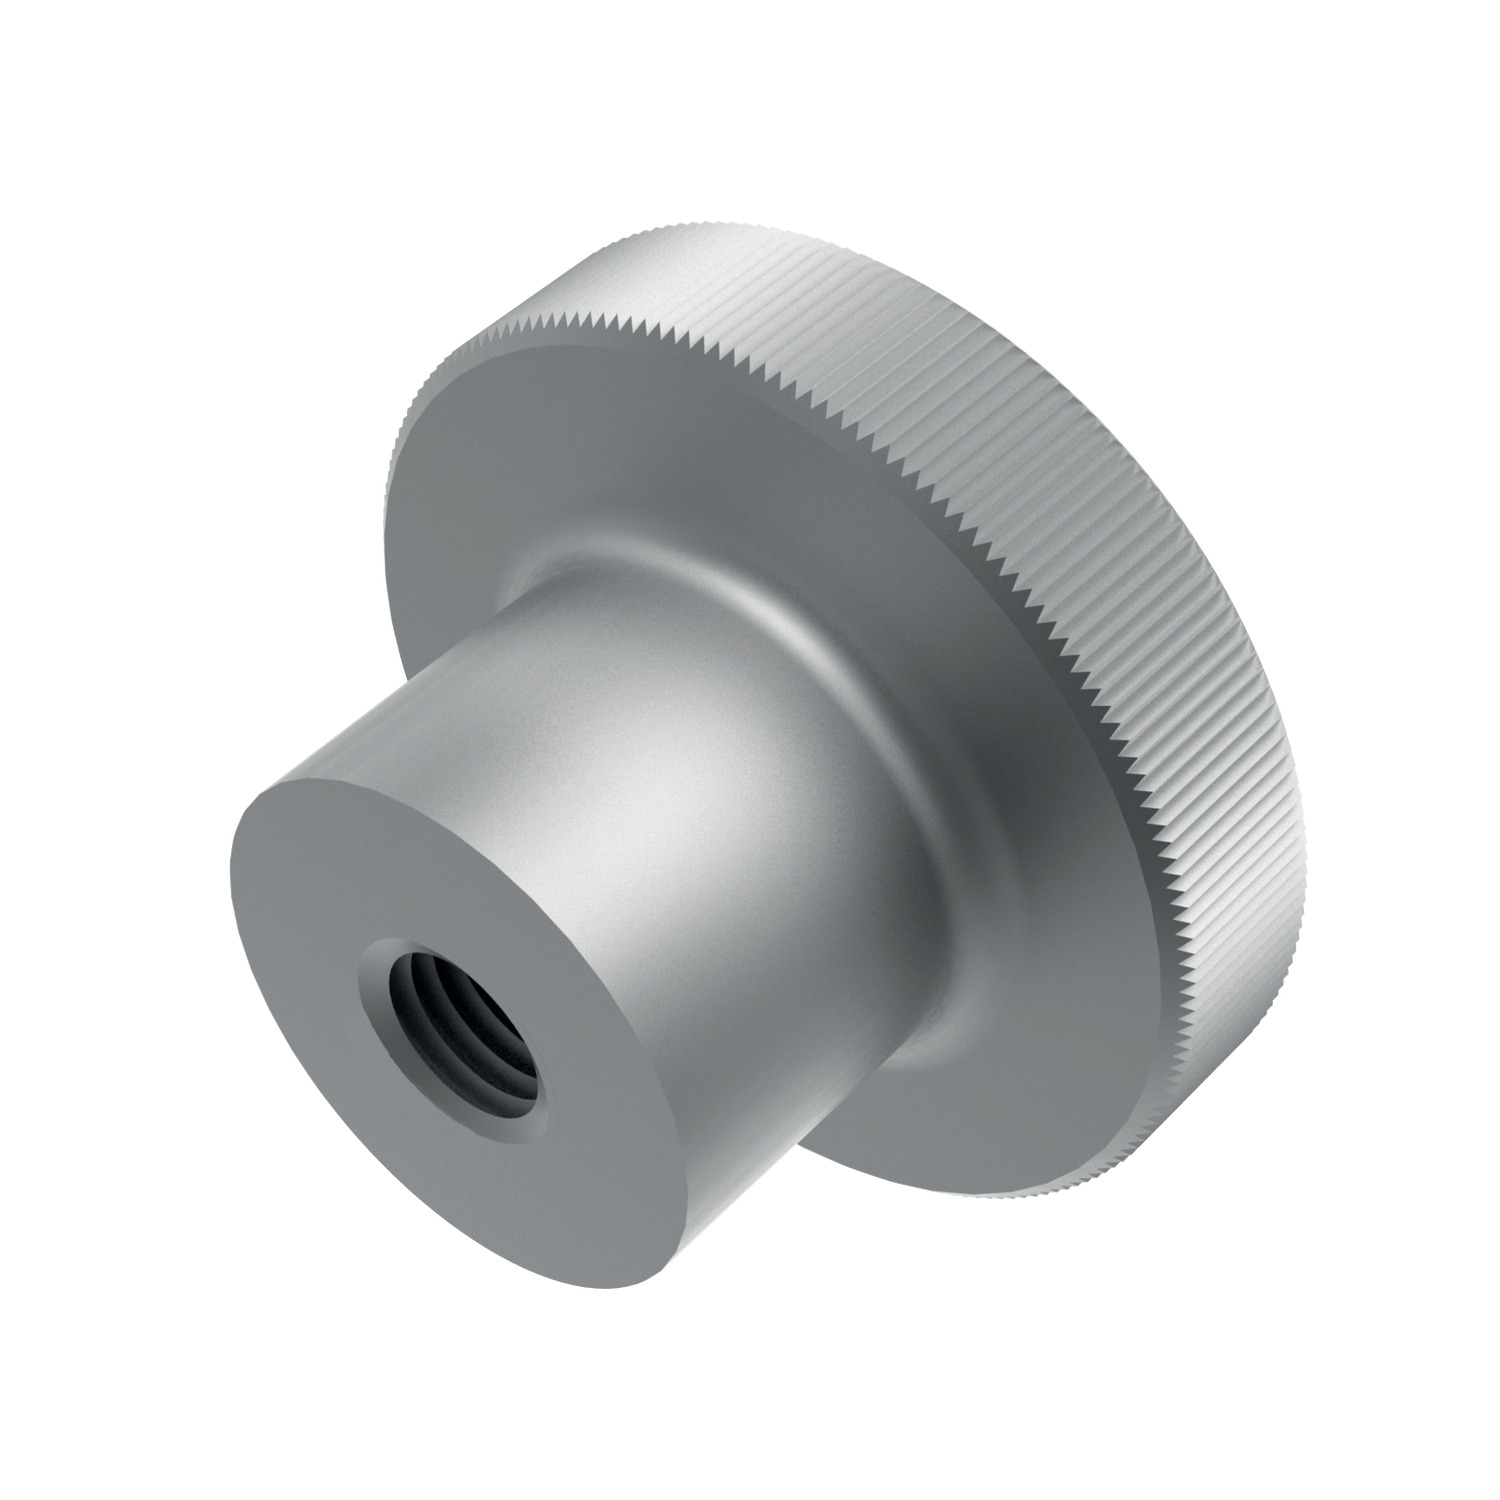 P0403.A4 - Knurled Thumb Nuts